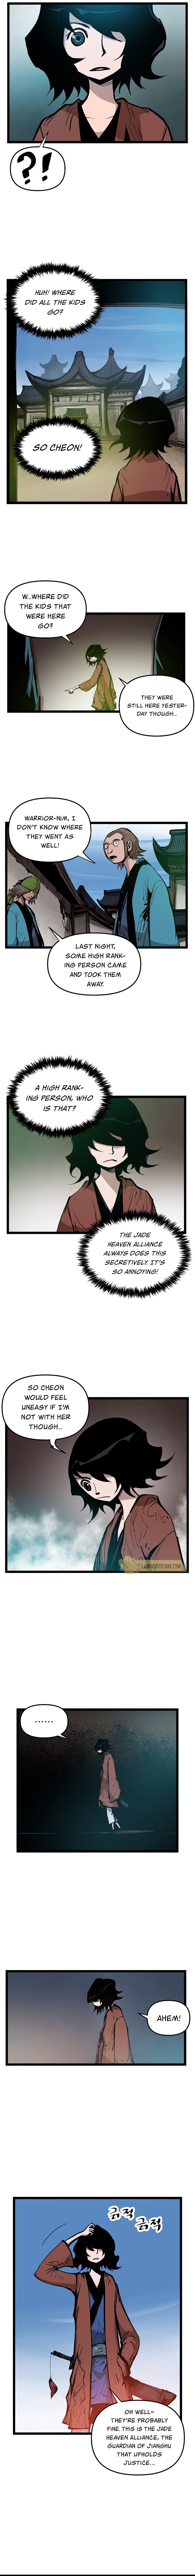 Martial Artist Lee Gwak Chapter 6 Page 3